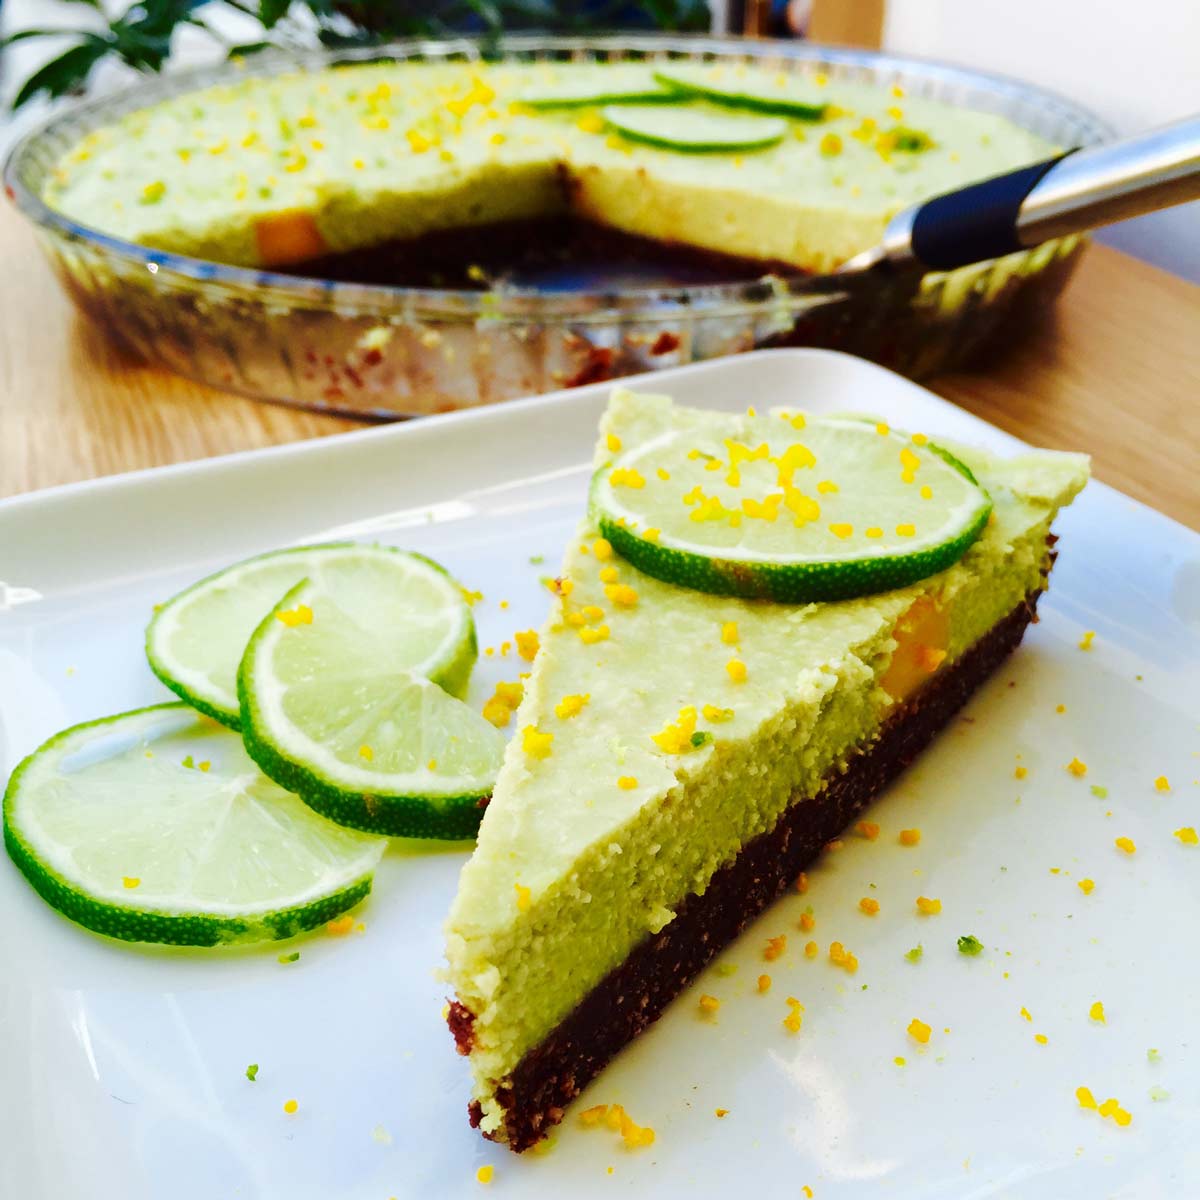 Savor this lime, dates and walnut pie, a bake-free, gluten-free, sugar-free and totally flavorful vegan pie.